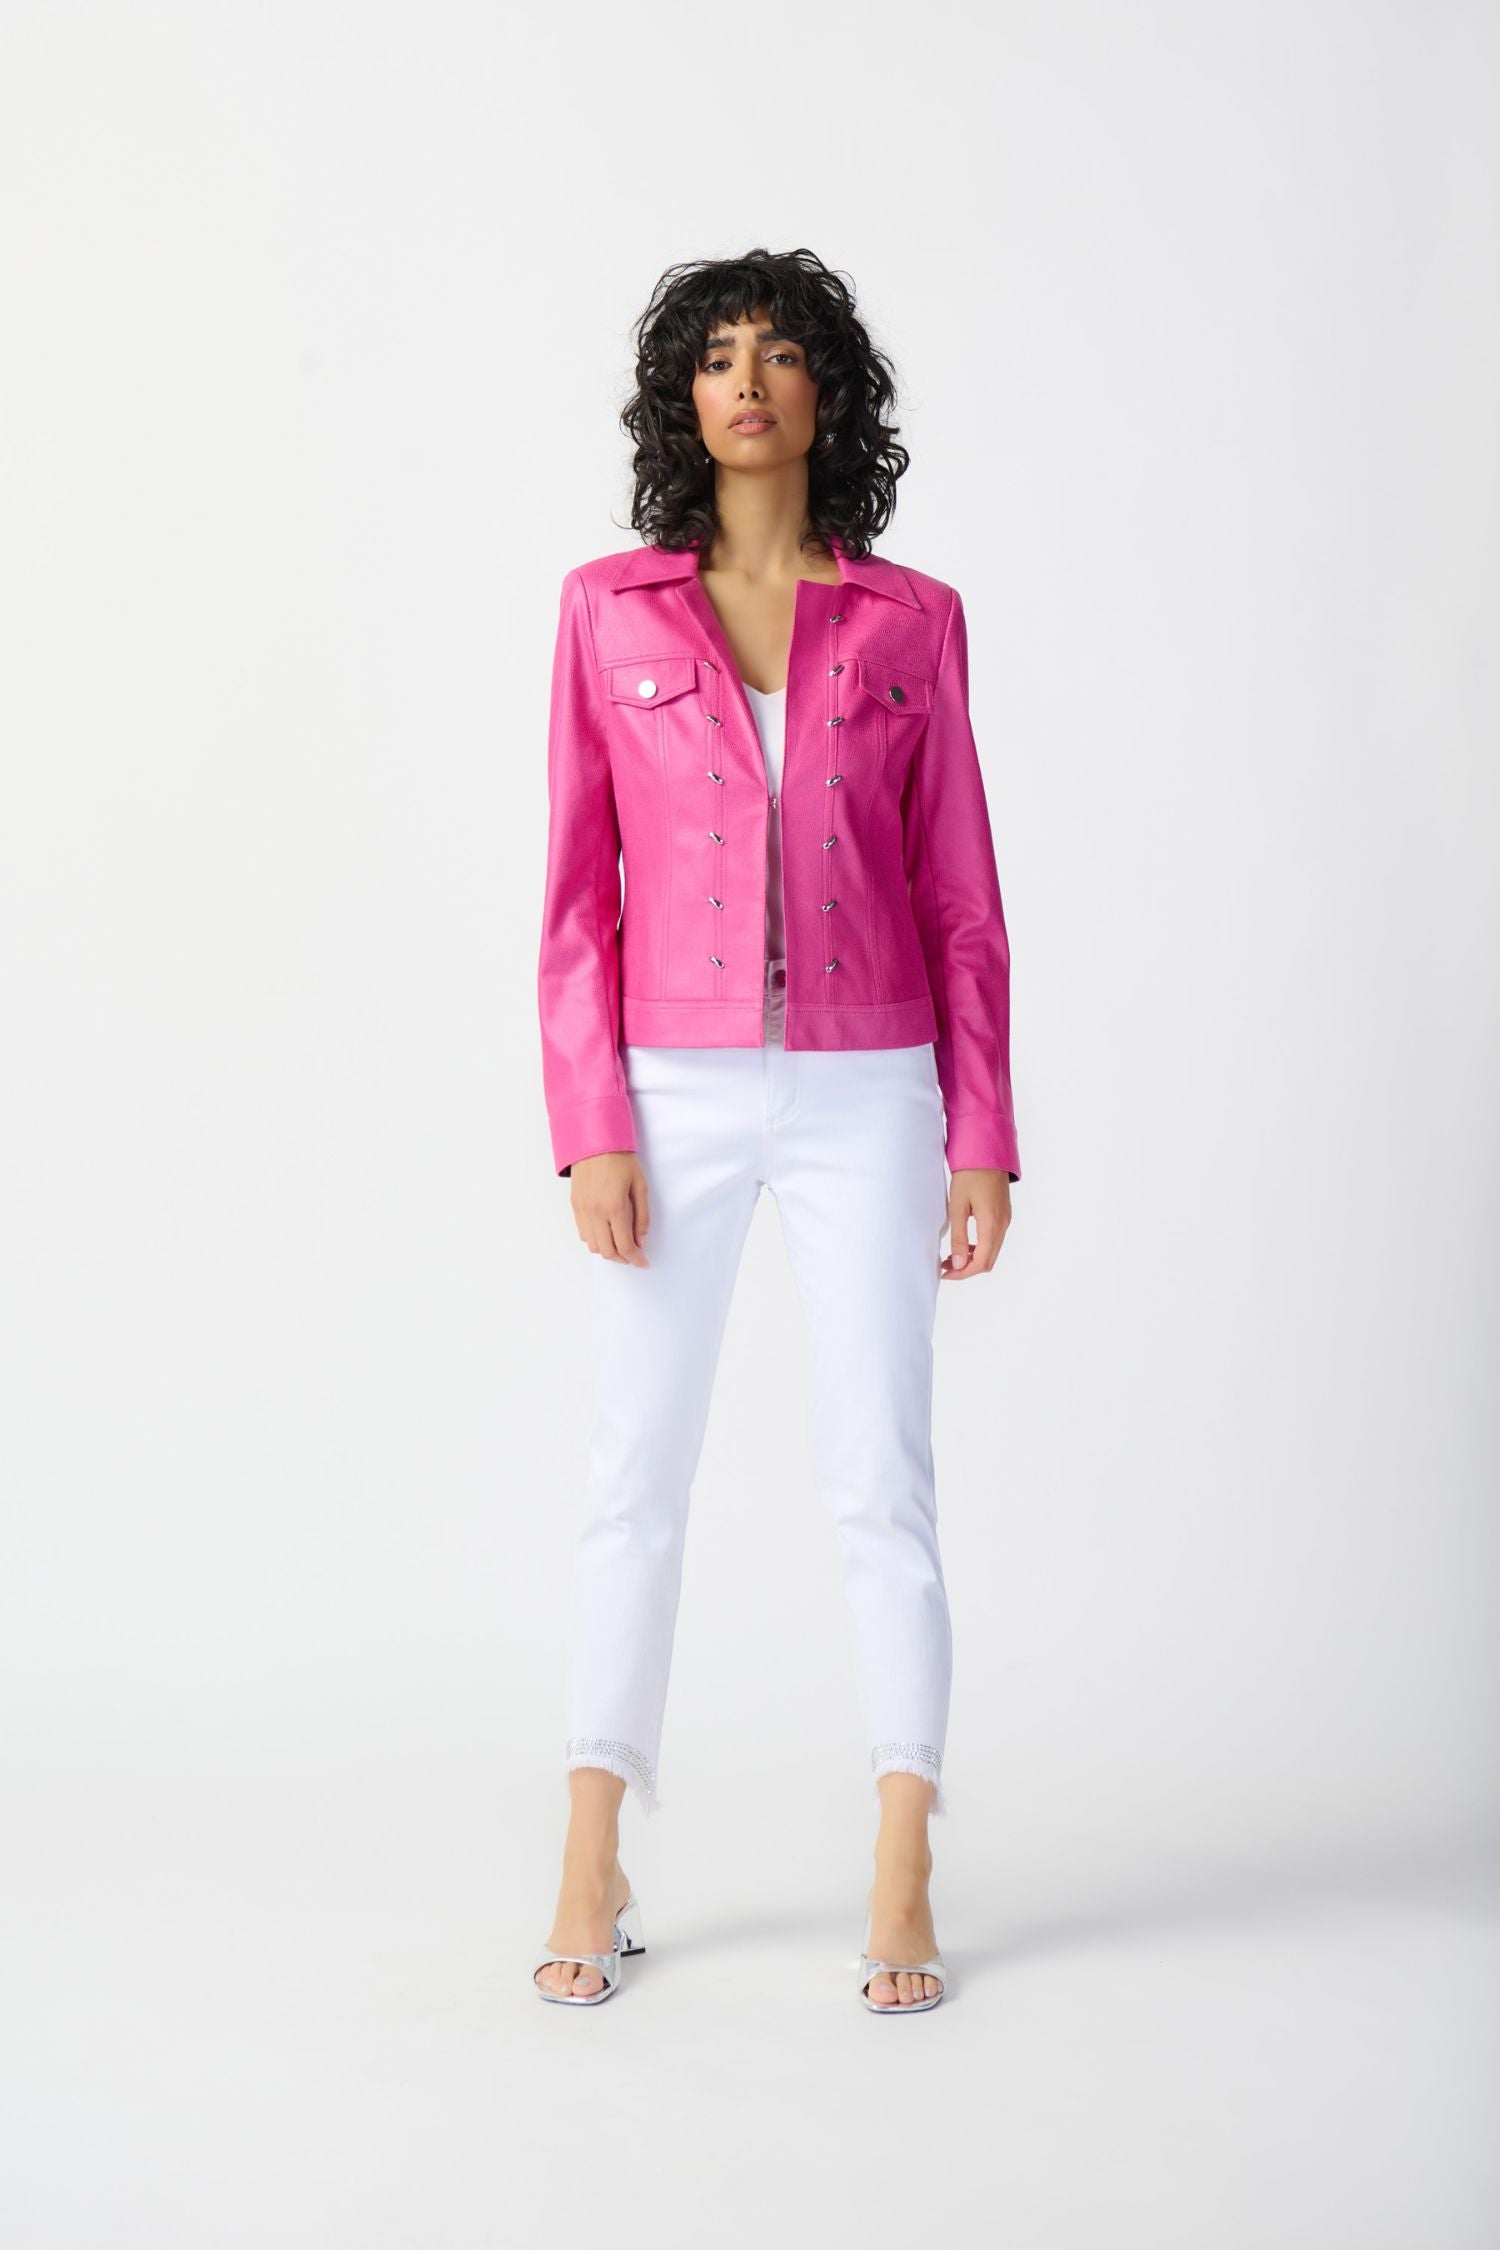 Joseph Ribkoff Foiled Suede Jacket With Metal Trims - Style 241911, front3, pink